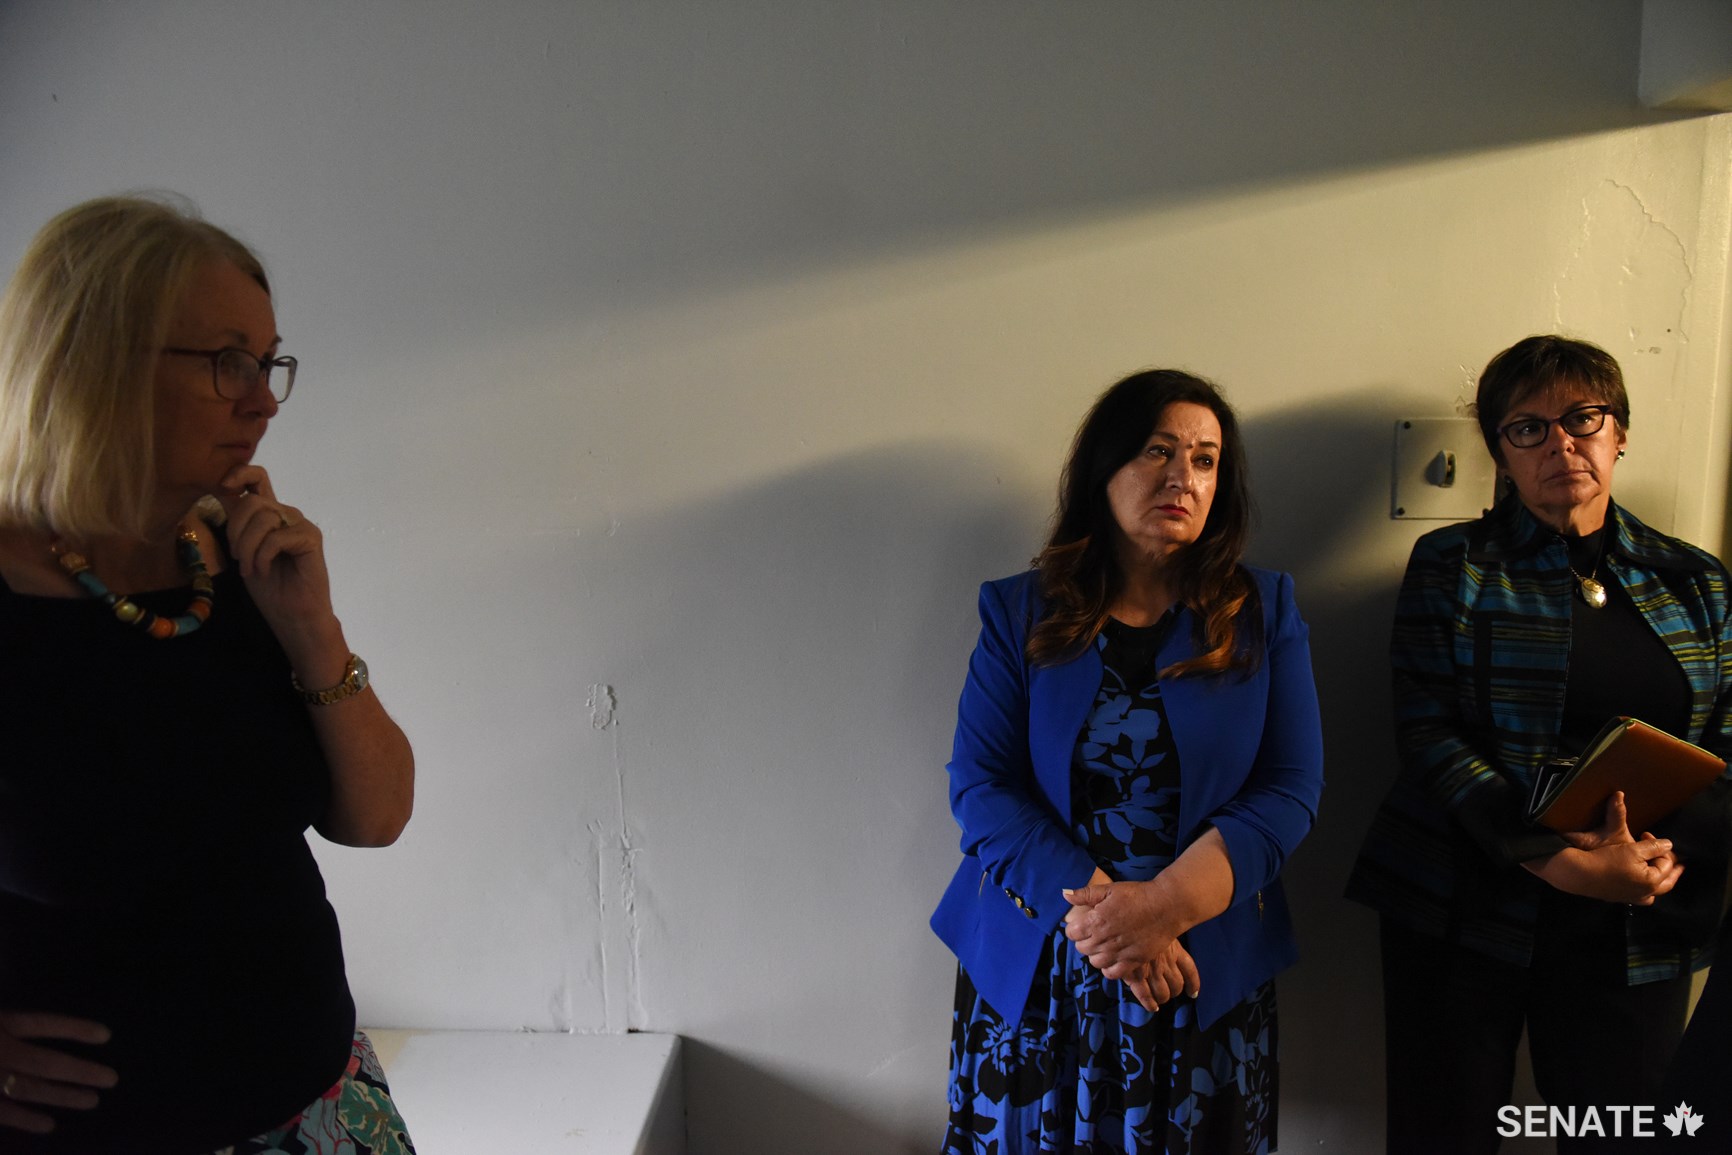 From left, committee deputy chairs senators Jane Cordy and Salma Ataullahjan, and Senator Pate stand in a health unit cell, where prisoners are held before receiving medical attention. Prisoners have often mentioned the lack of health care when speaking to the committee.